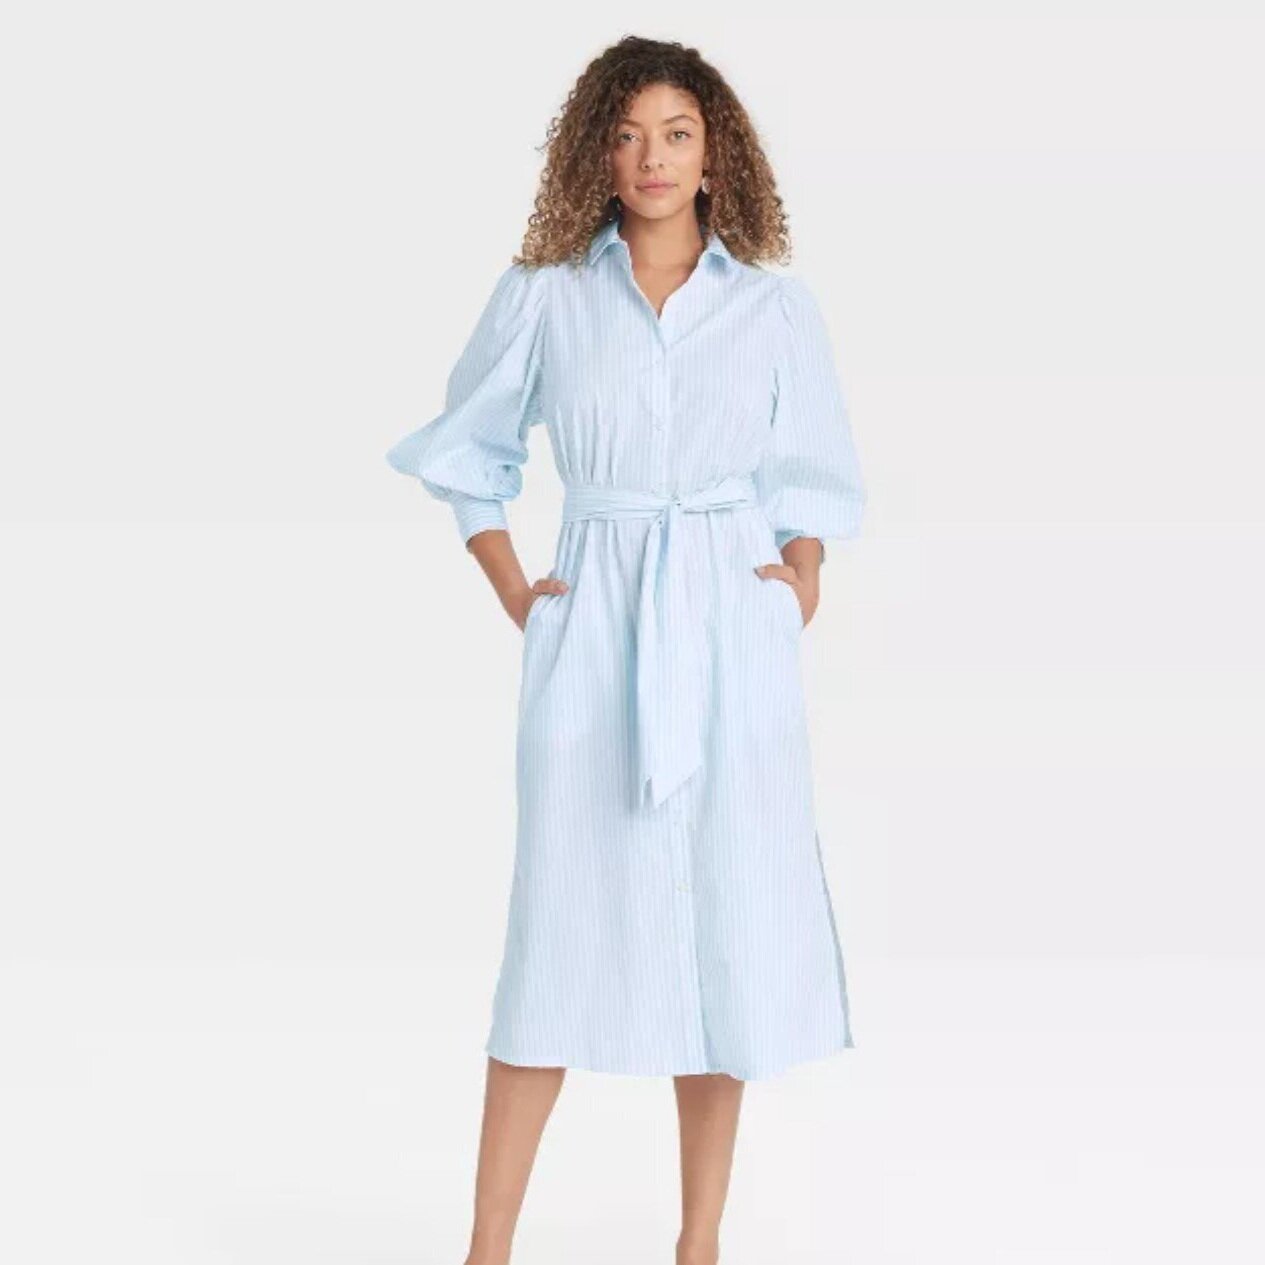 24 Target Items You Need for Spring! — christie ferrari